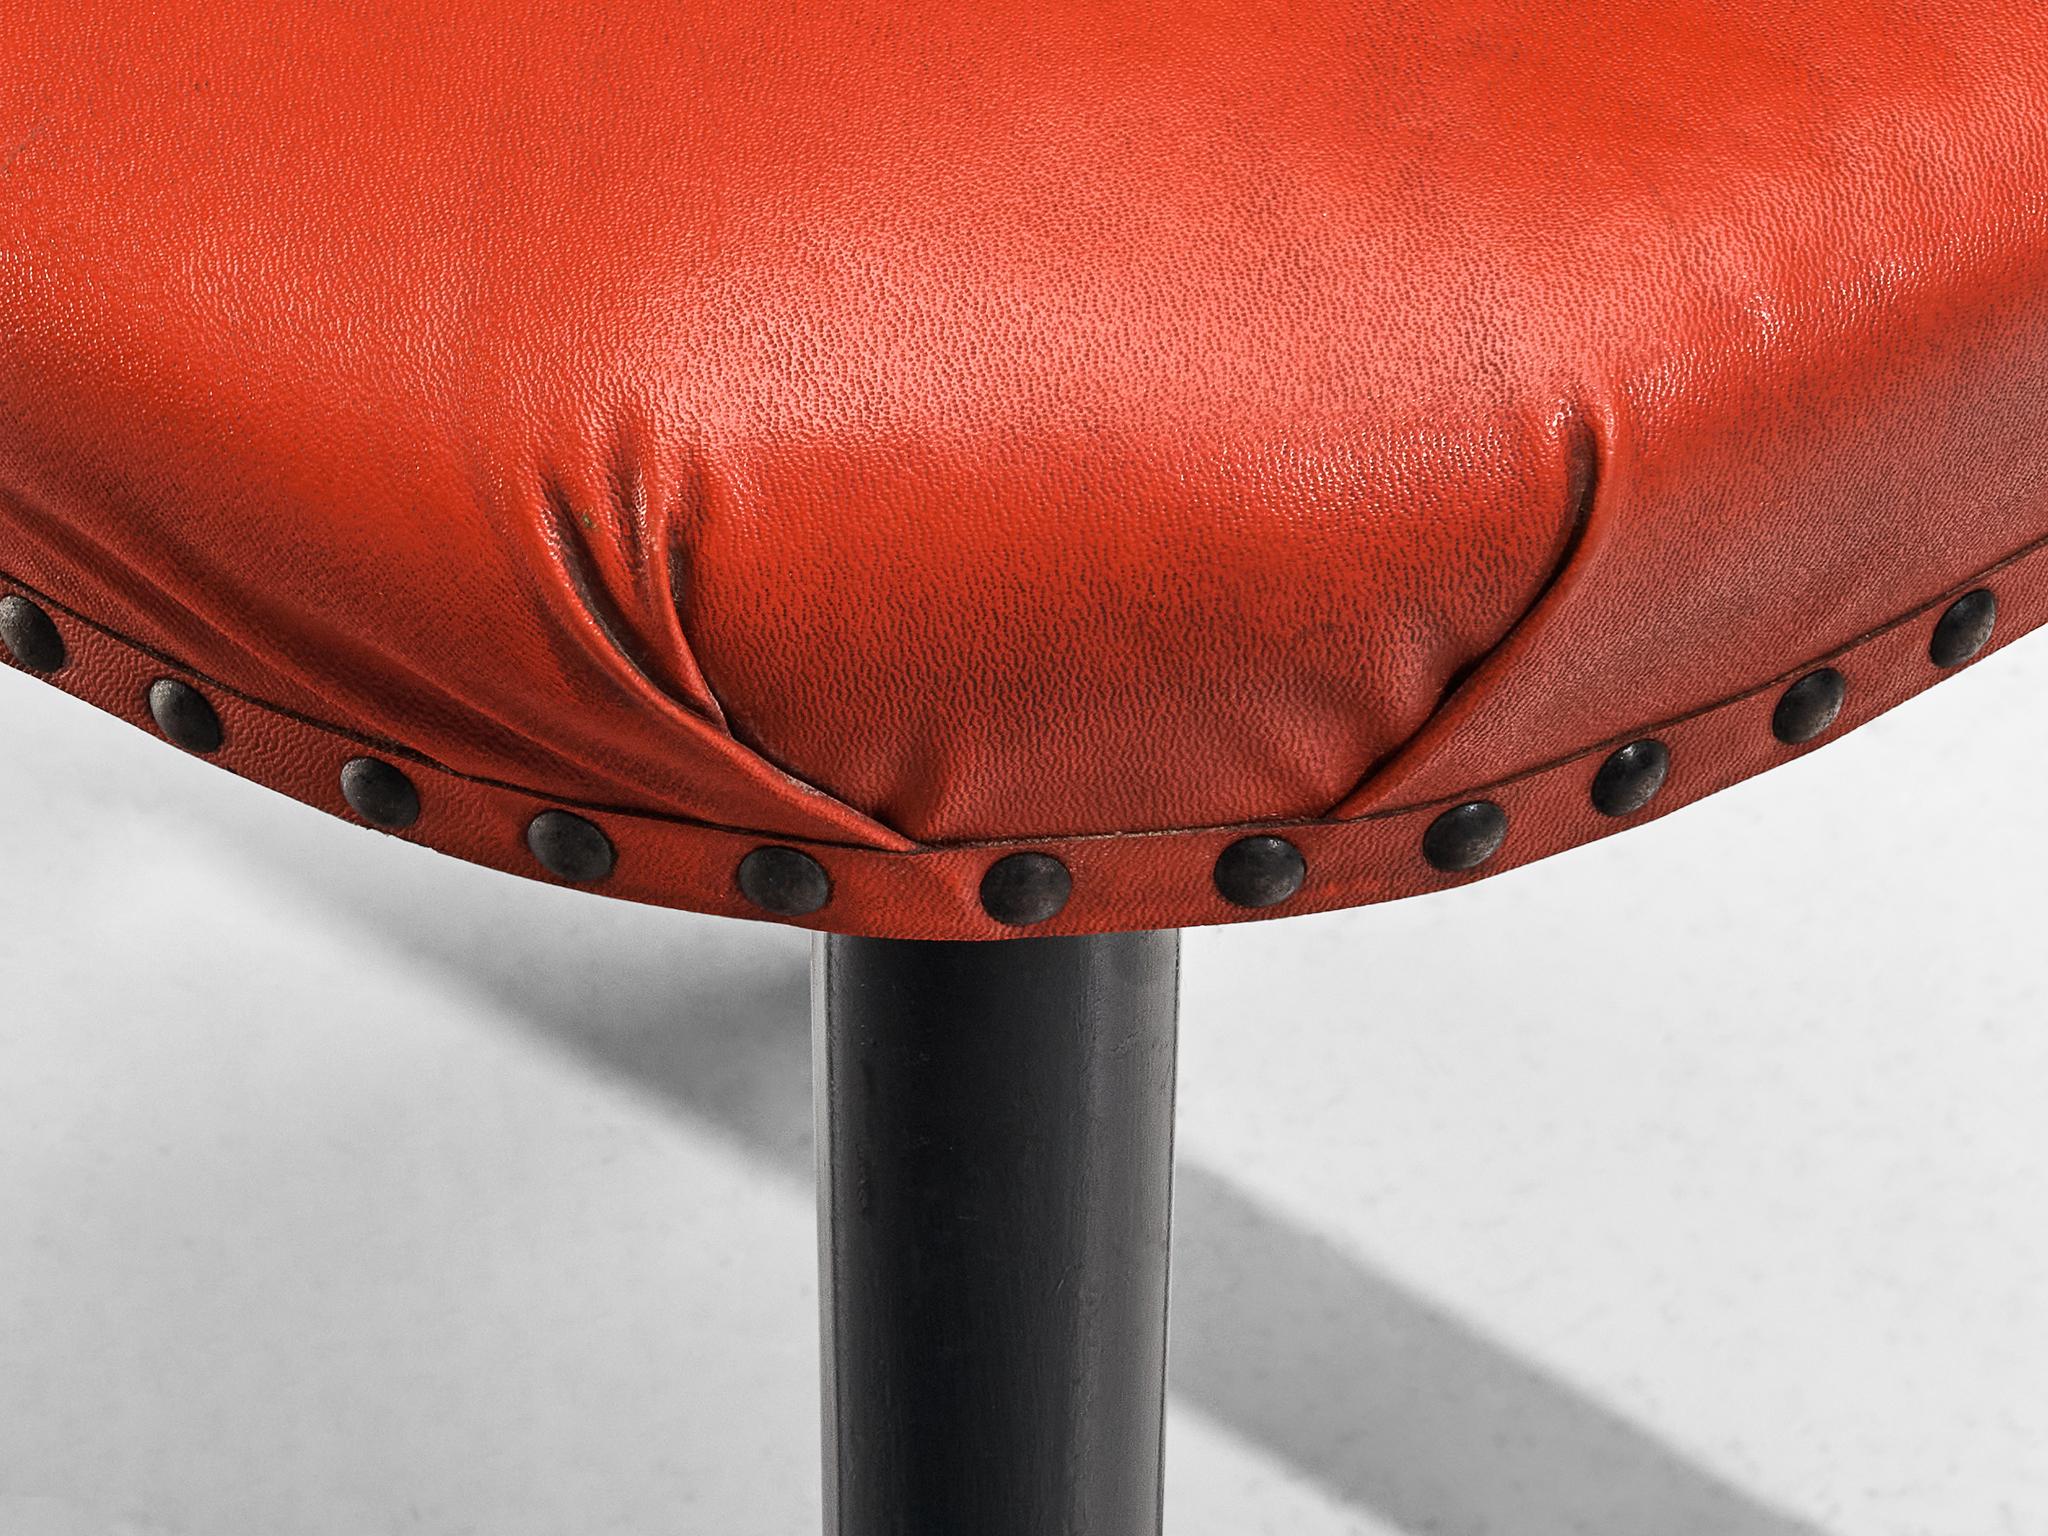 Art Deco Stools in Red Leatherette